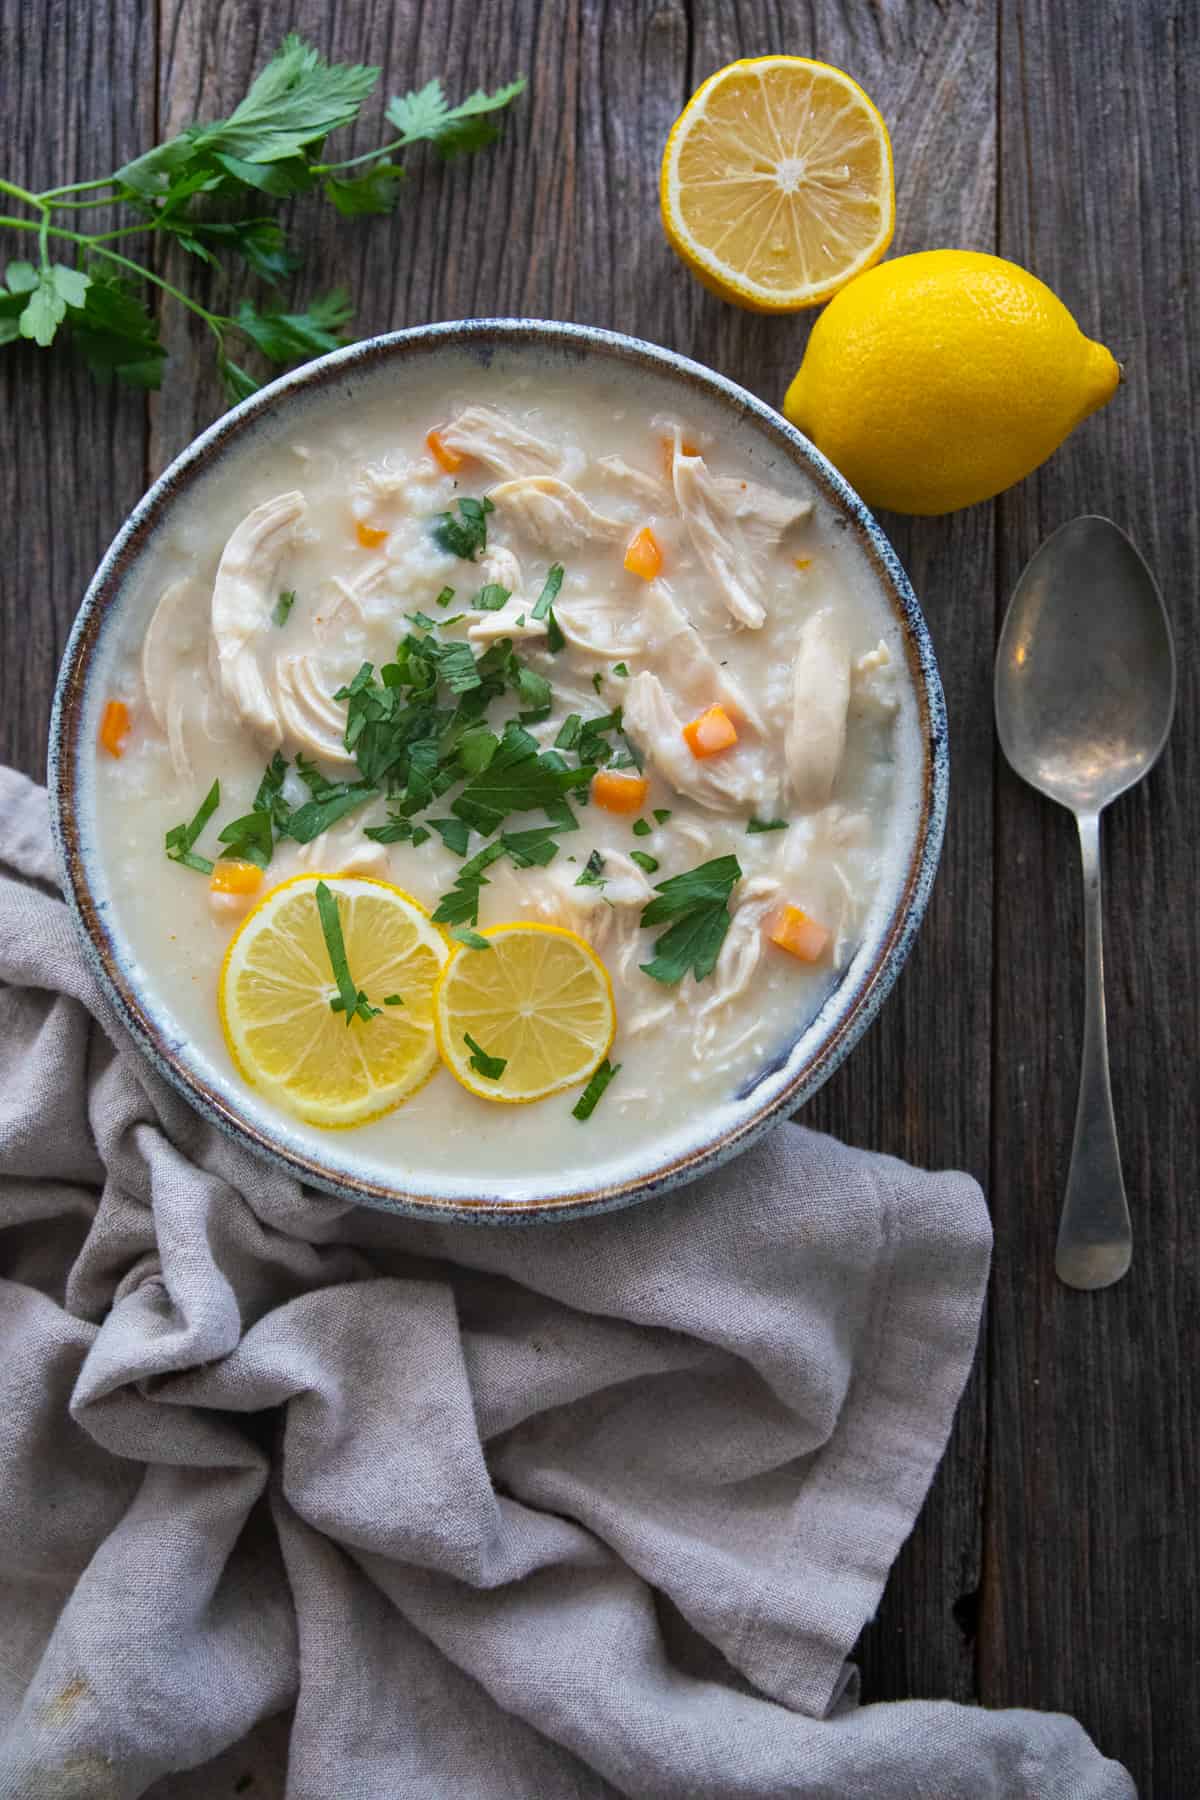 easy healthy dinner ideas - This avgolemono soup recipe is comforting with bright flavors. Made with the classic egg lemon sauce, avgolemono, this Greek lemon chicken soup is so satisfying. Follow along for all my tips and instructions to make this authentic Greek chicken soup.
